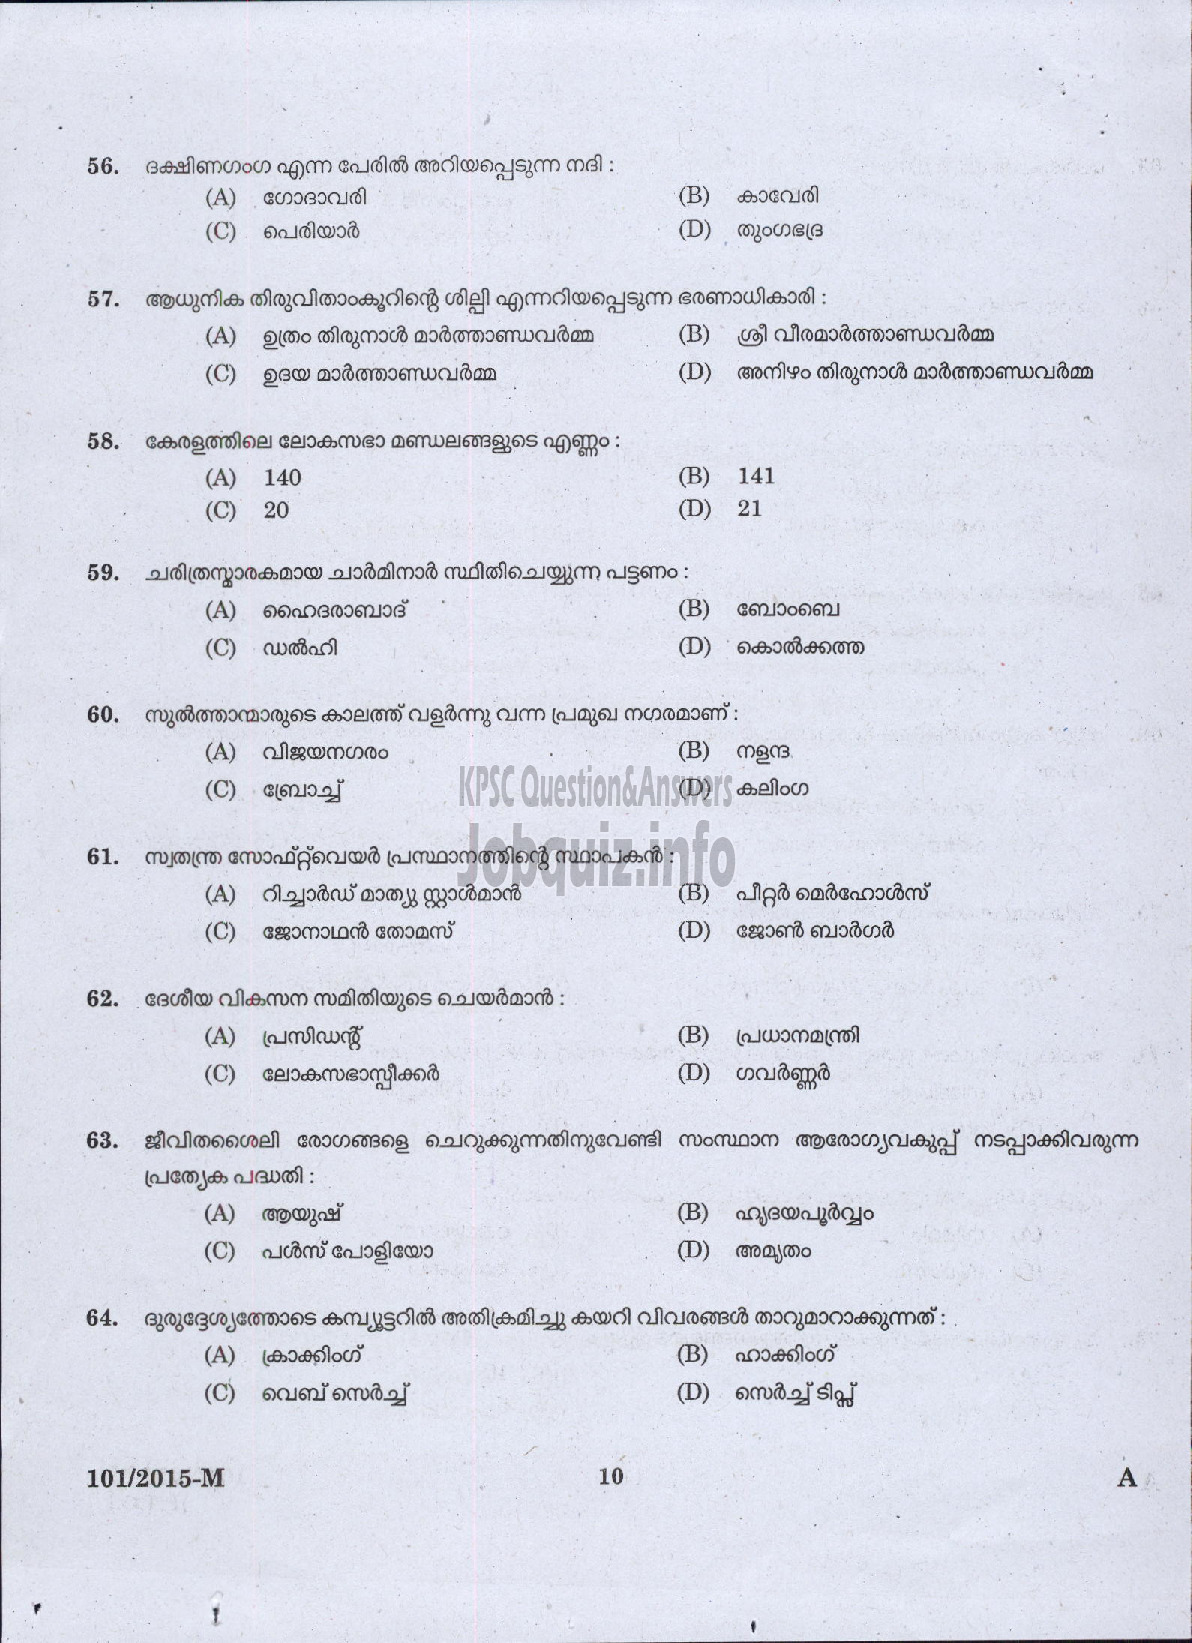 Kerala PSC Question Paper - FIREMAN DRIVER CUM PUMP OPERATOR TRAINEE FIRE AND RESCUE SERVICES ( Malayalam ) -8